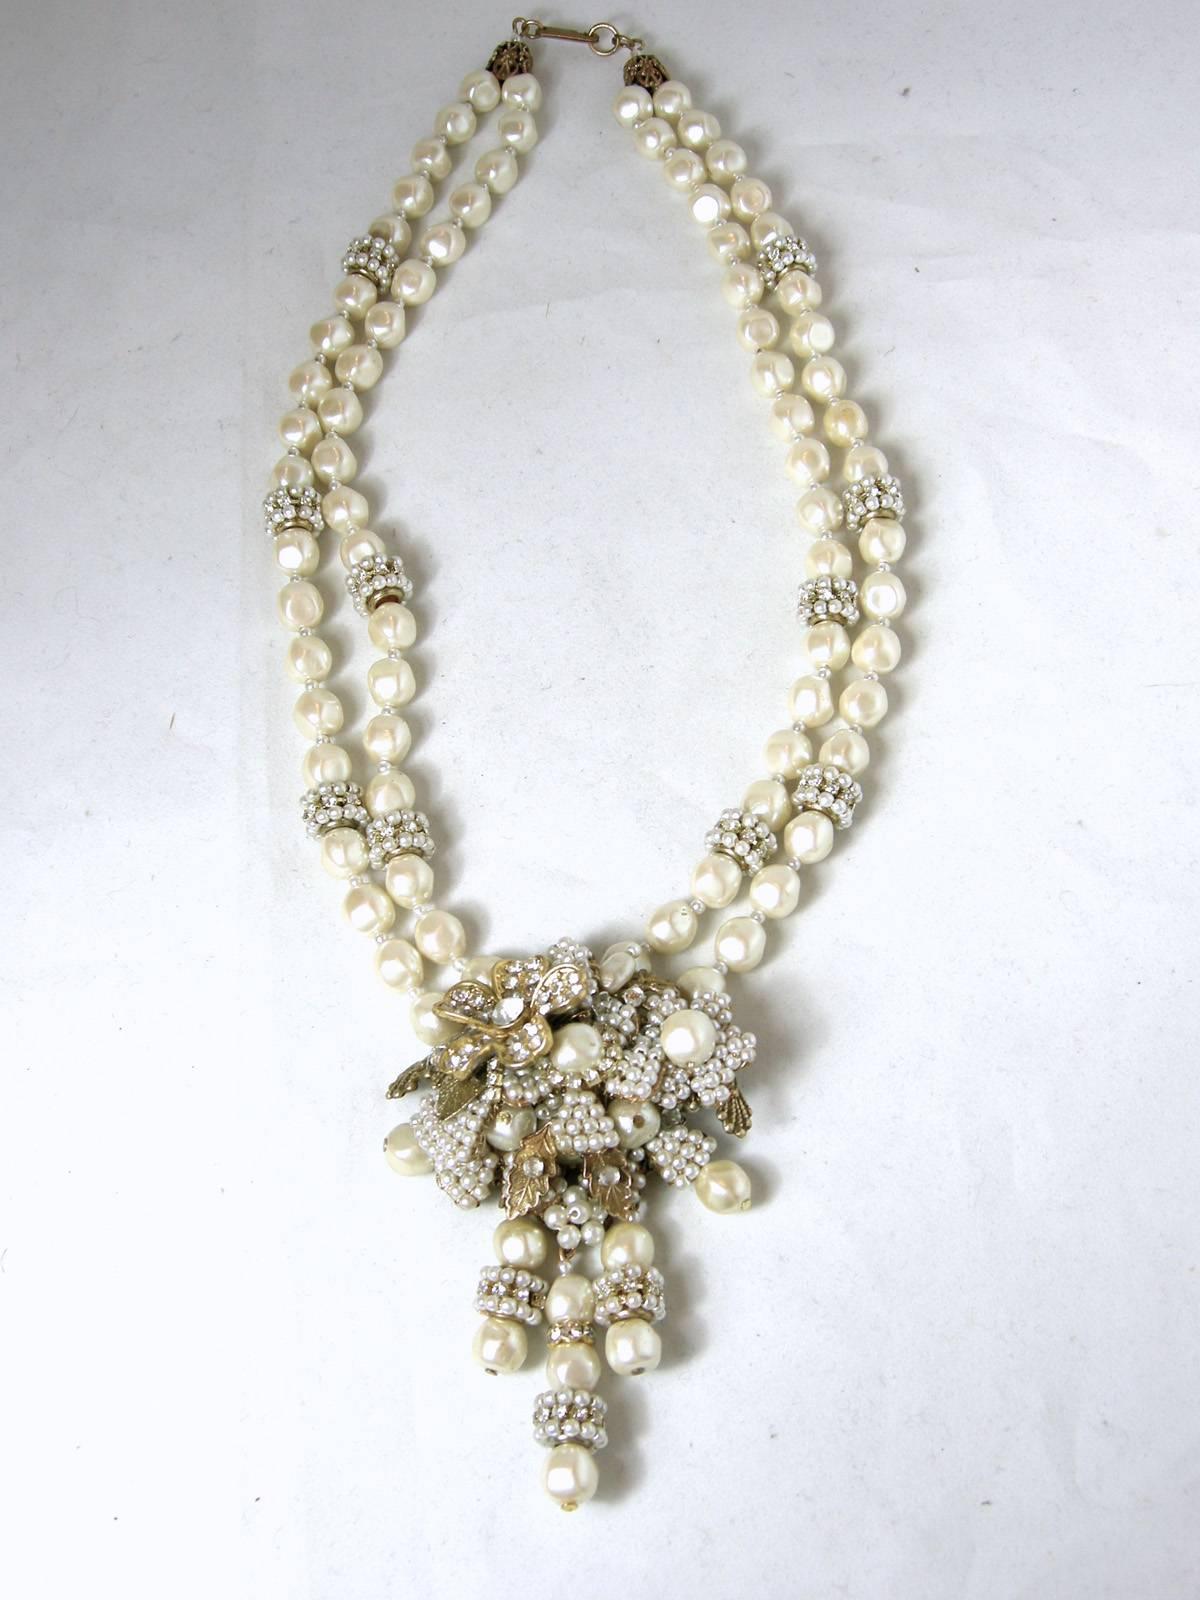 This necklace is an unsigned but it has the old Haskell pull clasp with the patent number.  It has two strands of faux baroque pearls with faux pearl rhondelle dividers leading down to the centerpiece.  The centerpiece has a rhinestone flower and